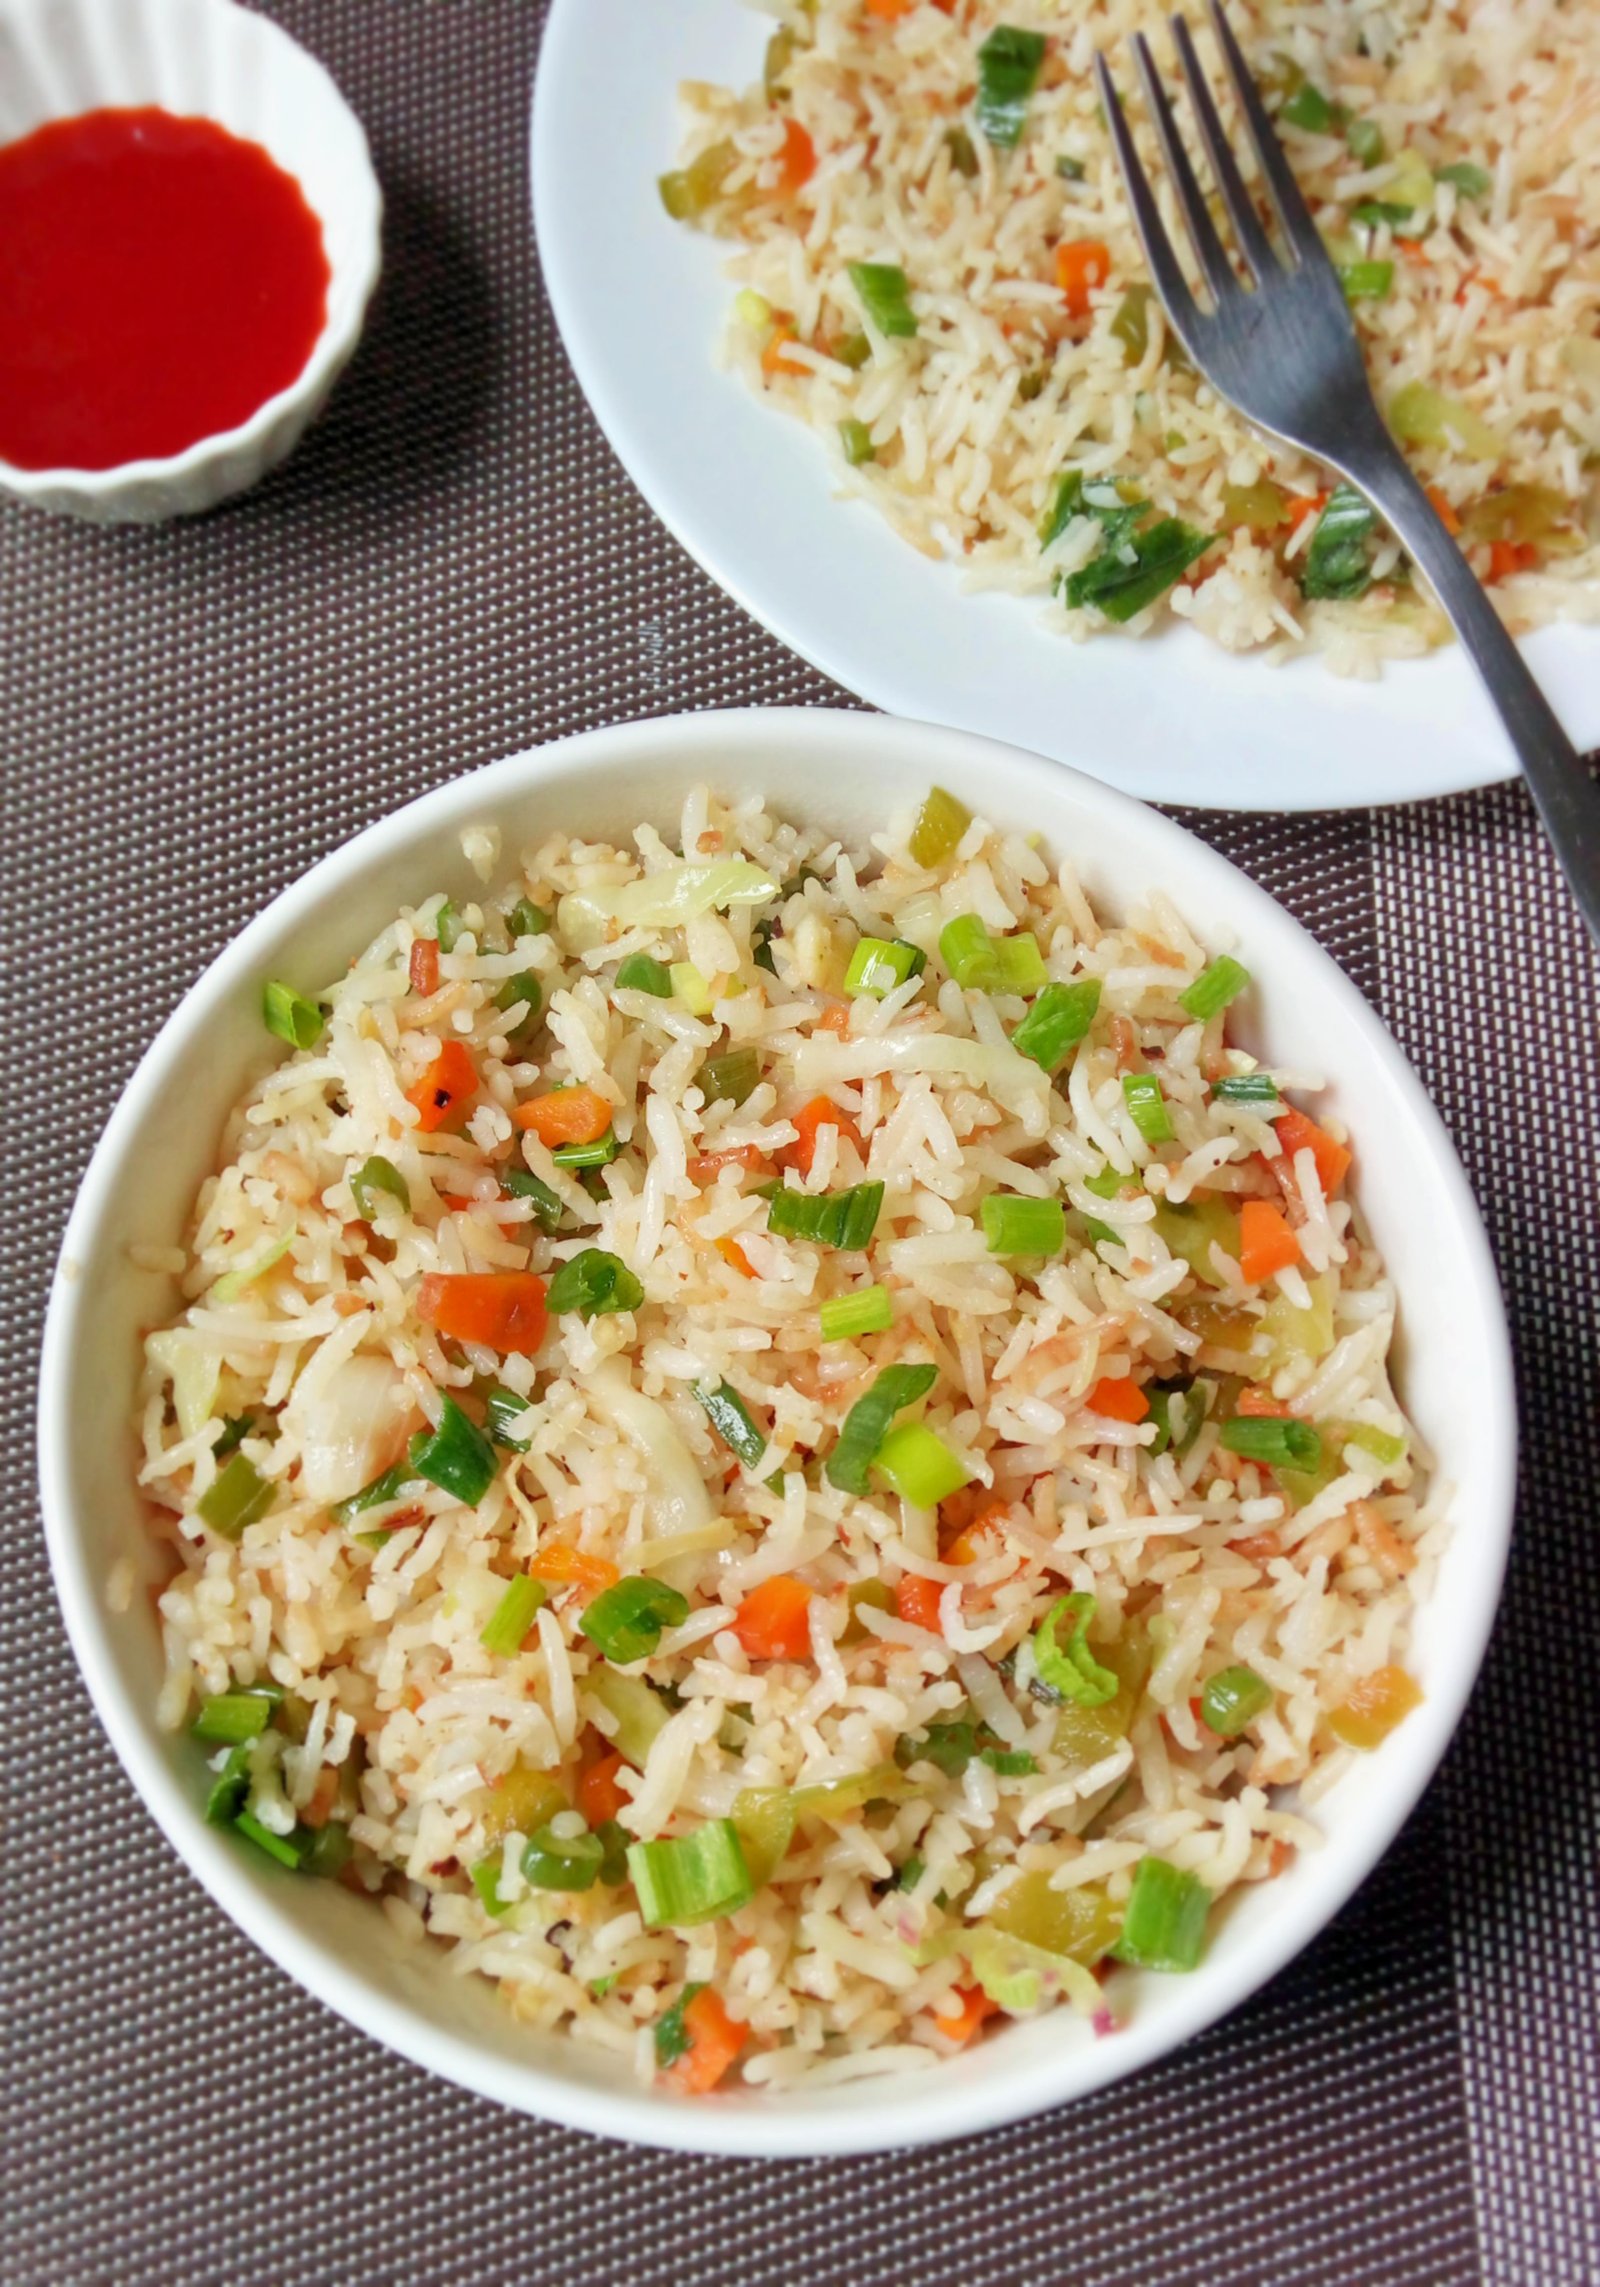 Vegetable Fried Rice Indo Chinese Fried Rice Recipe Palate S Desire.